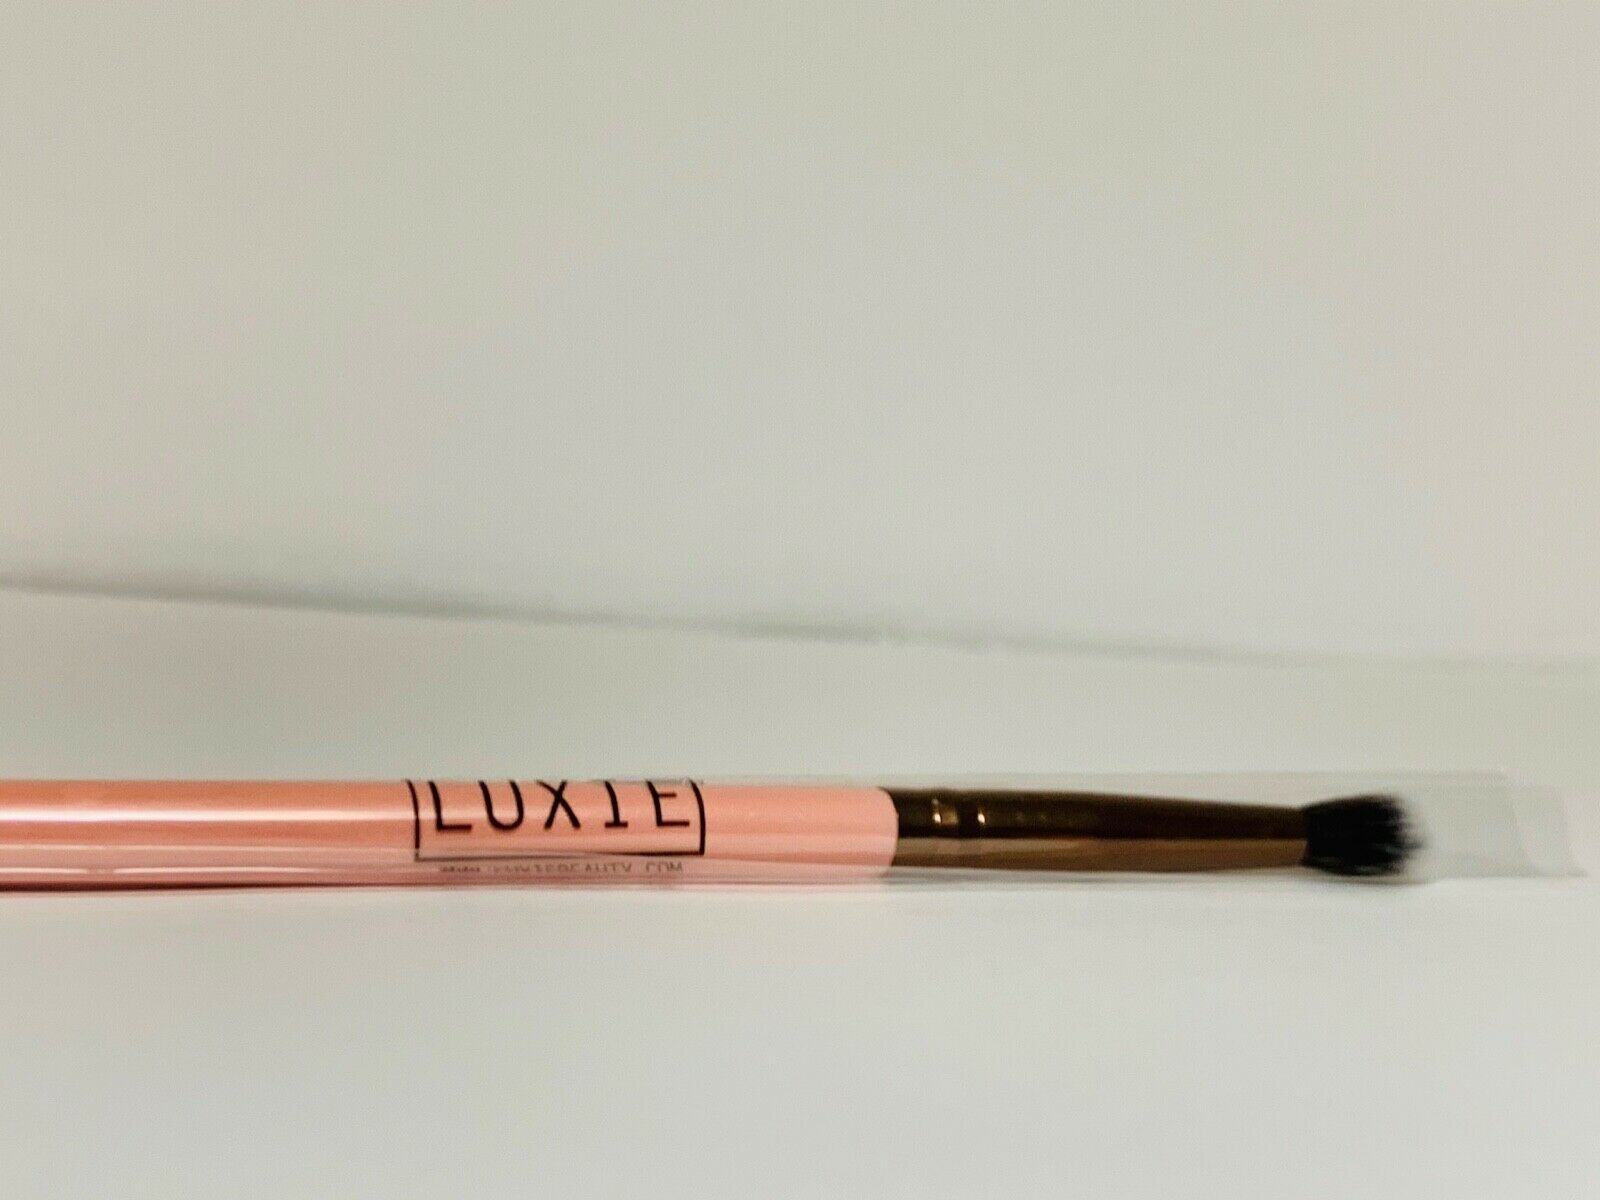 Luxie Beauty 231 Rose Gold Small Tapered Blending Eye shadow Brush - $8.99